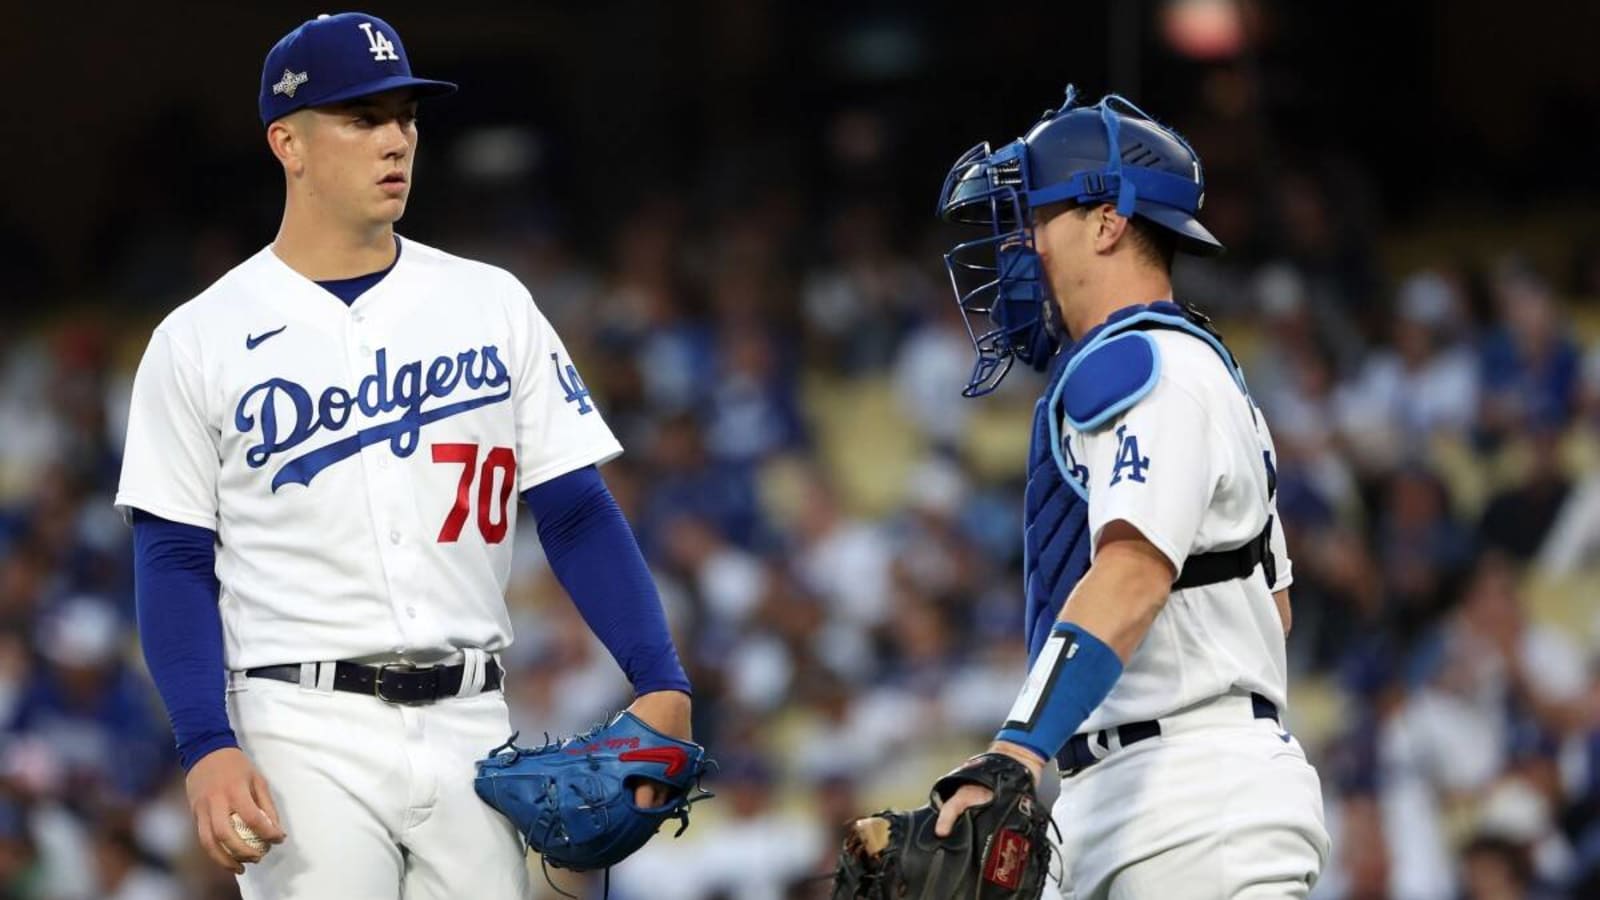 Dodgers Reportedly Have Not Talked Extension With Core Piece of Roster